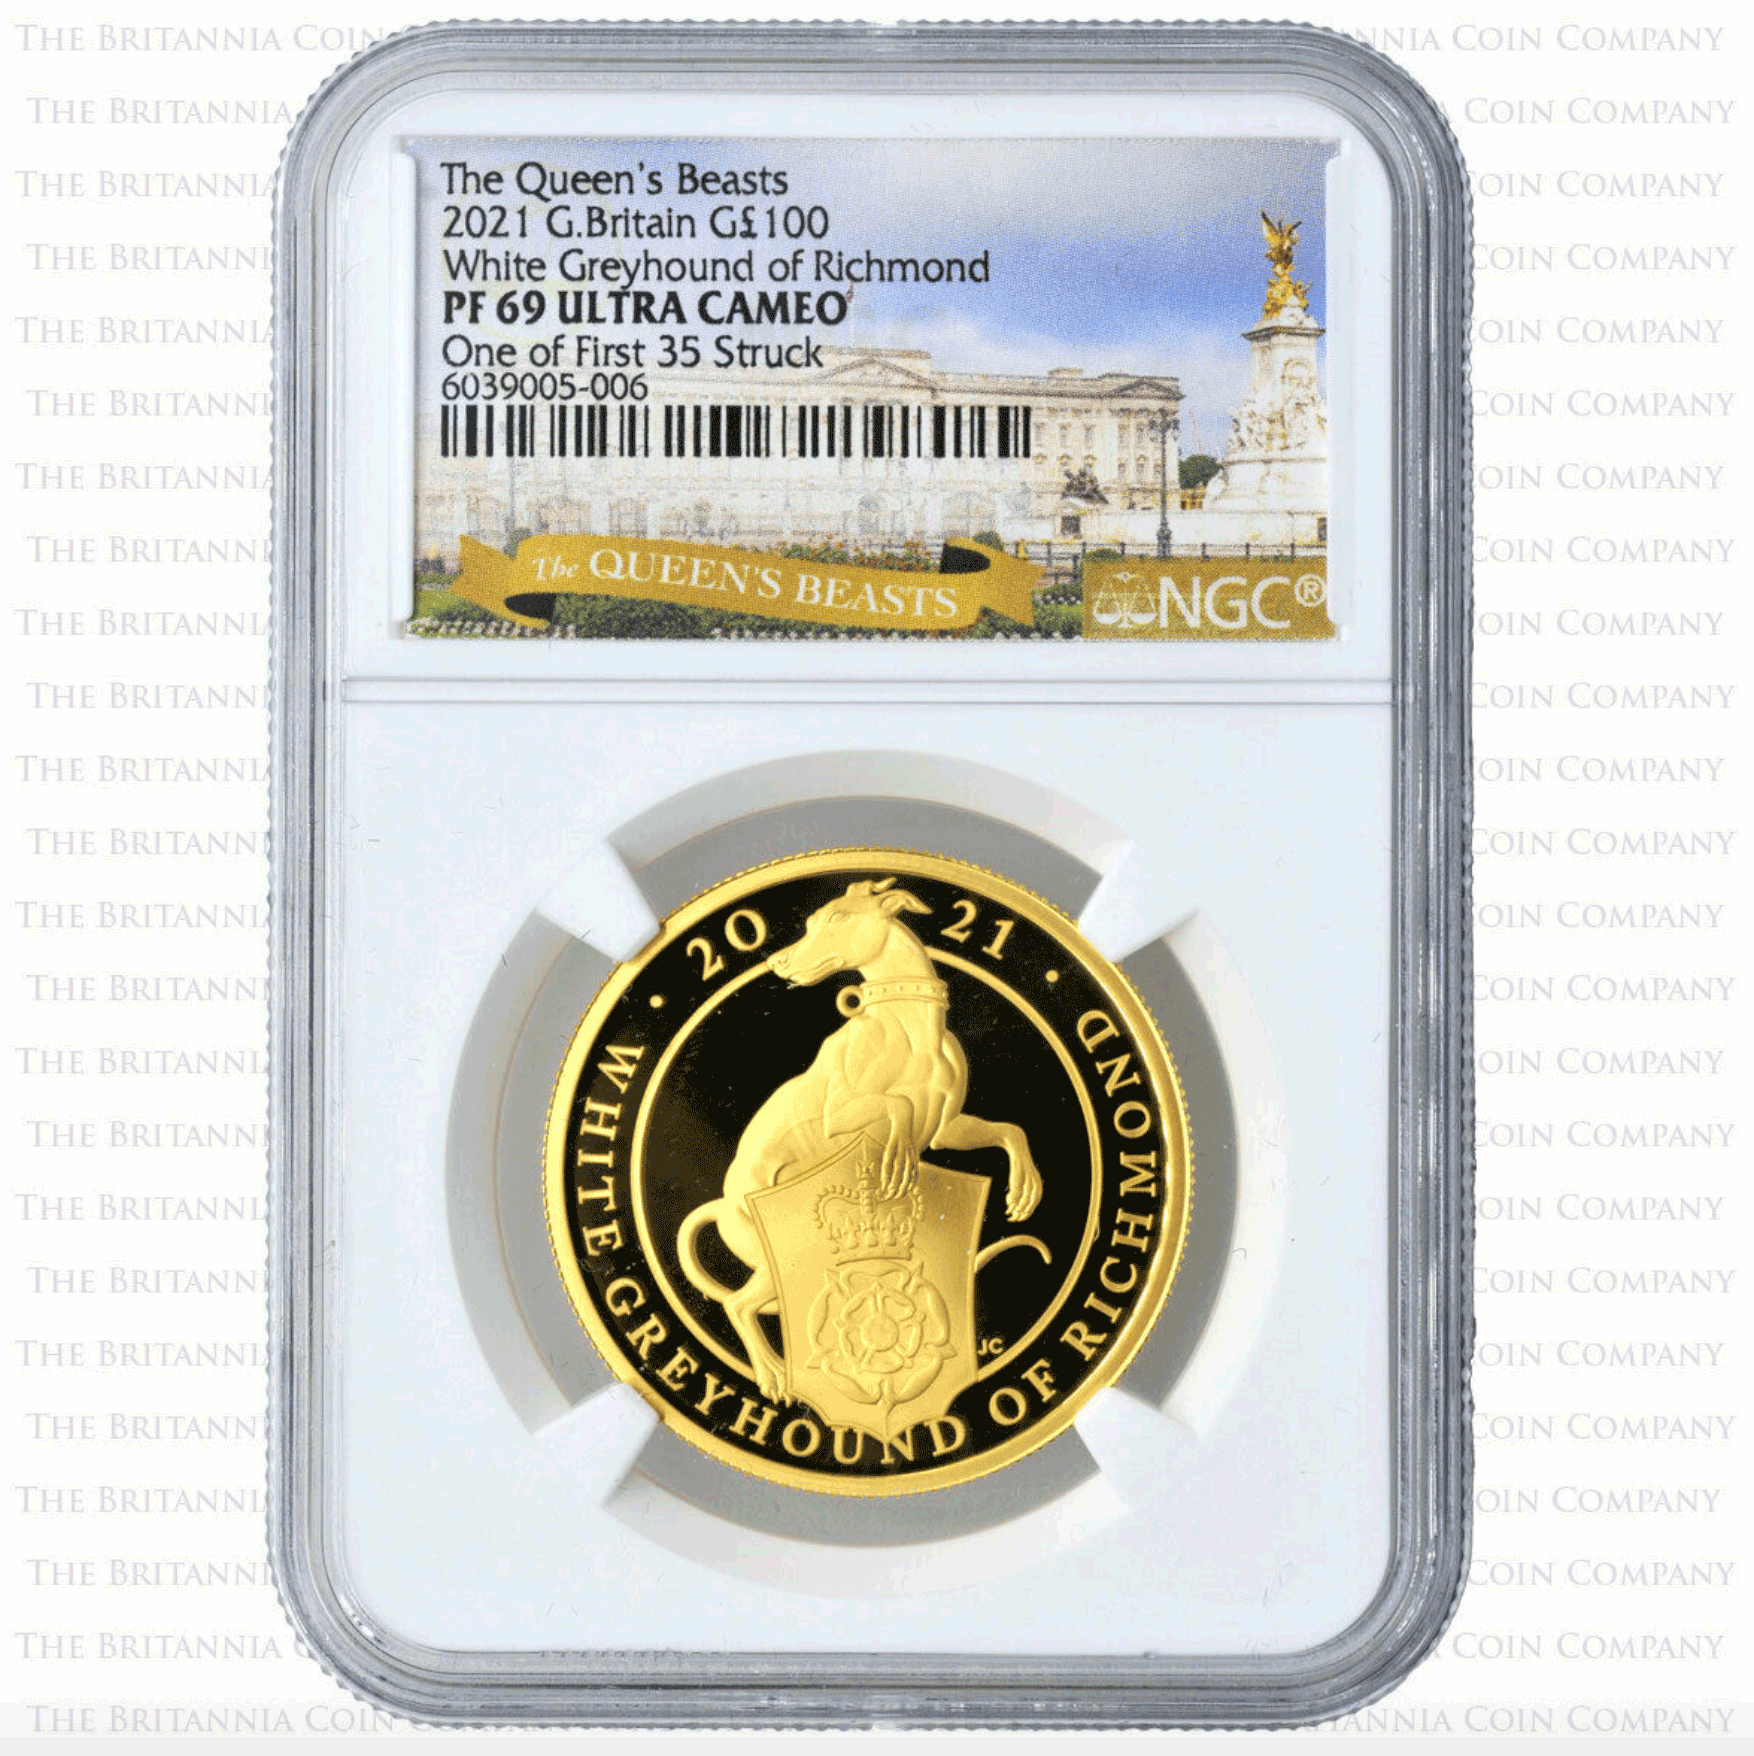 2021-Queens-Beasts-Greyhound-Gold-Proof-1oz-PF69-1